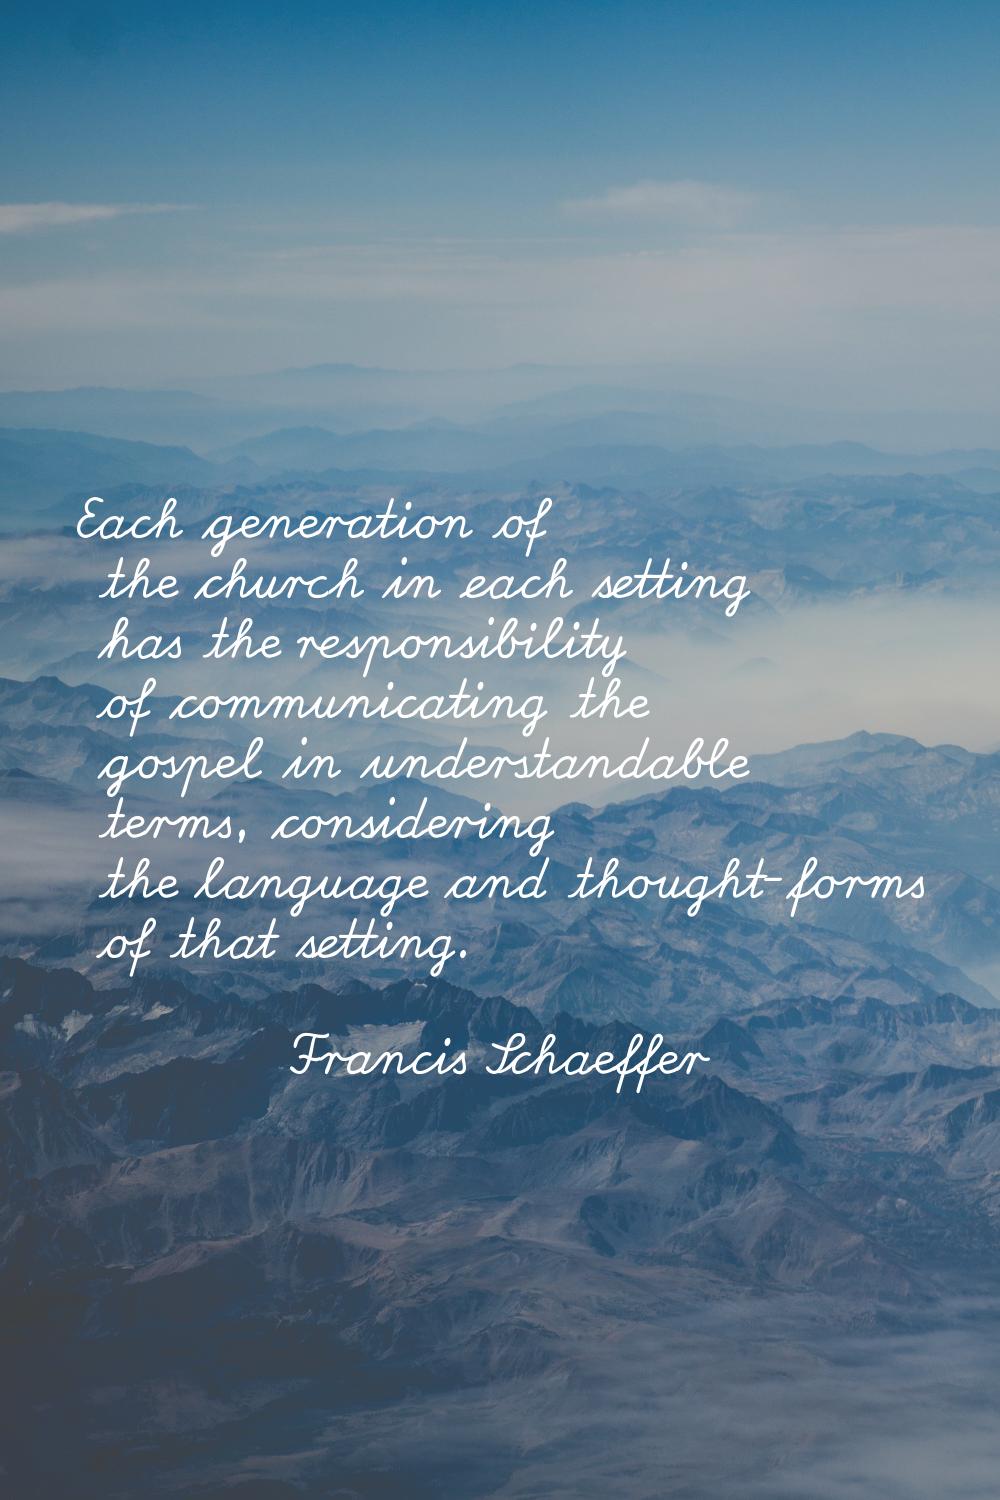 Each generation of the church in each setting has the responsibility of communicating the gospel in